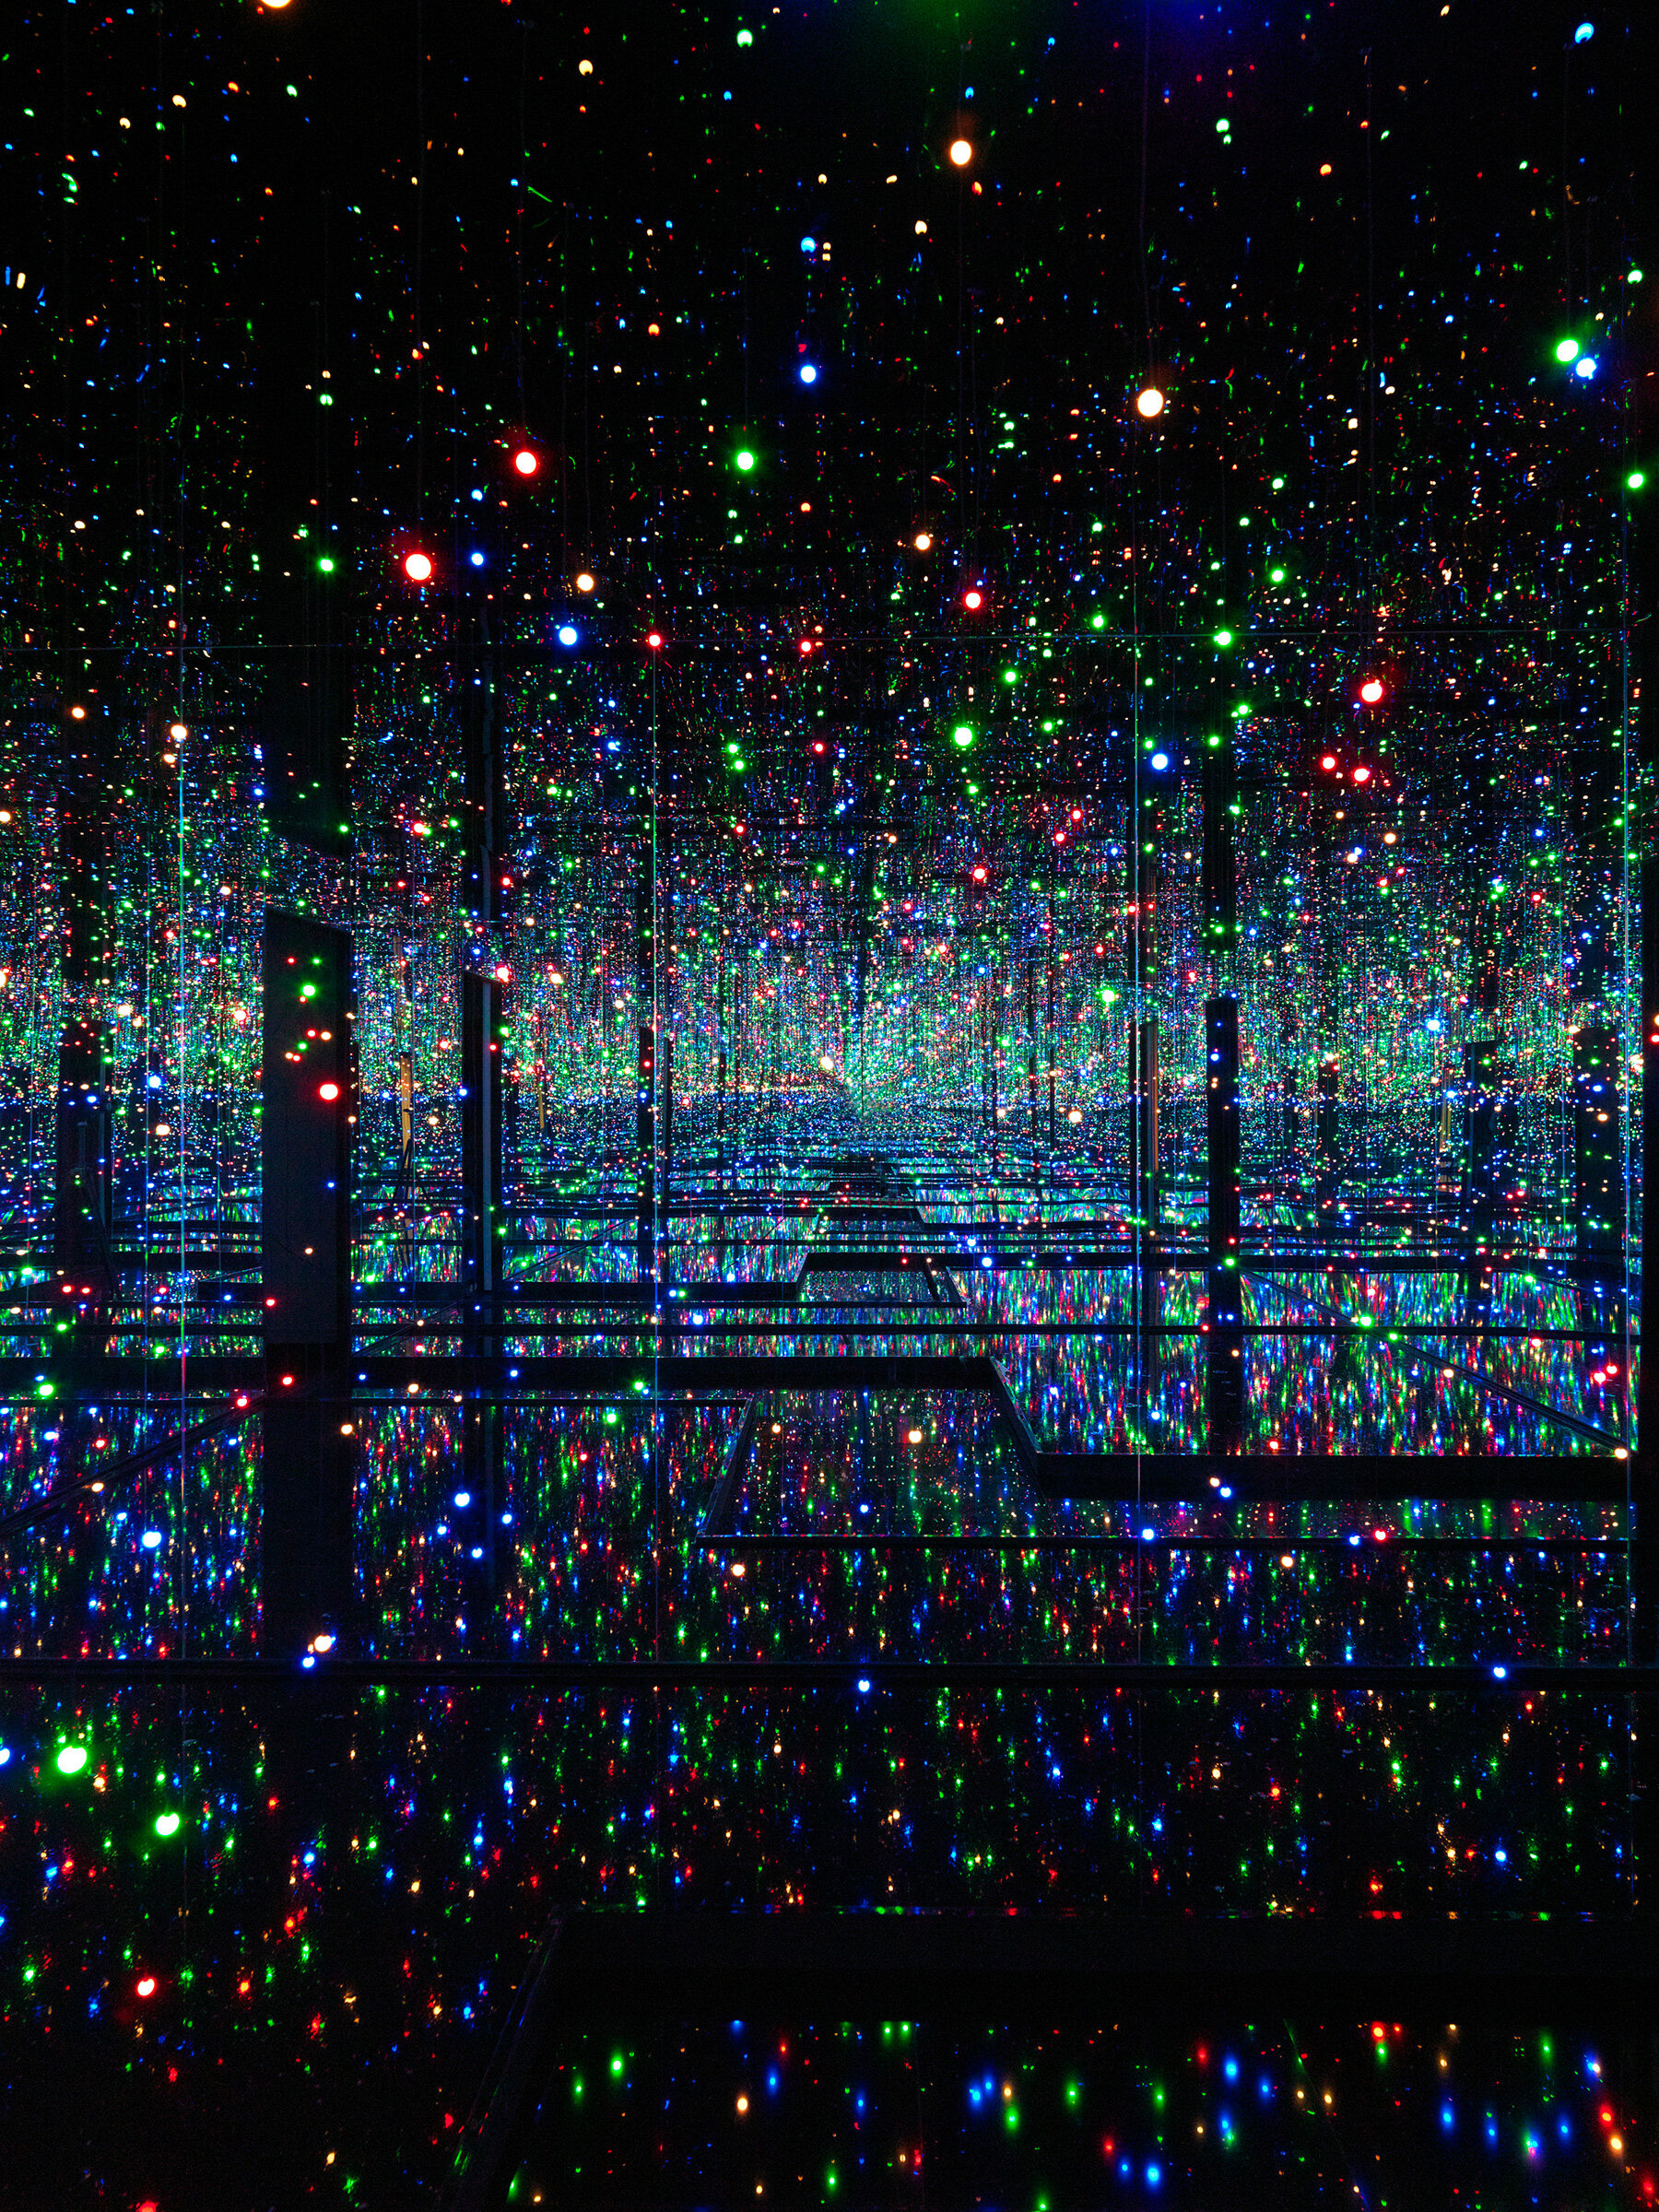 Our guide to experiencing infinity in Yayoi Kusama's Infinity